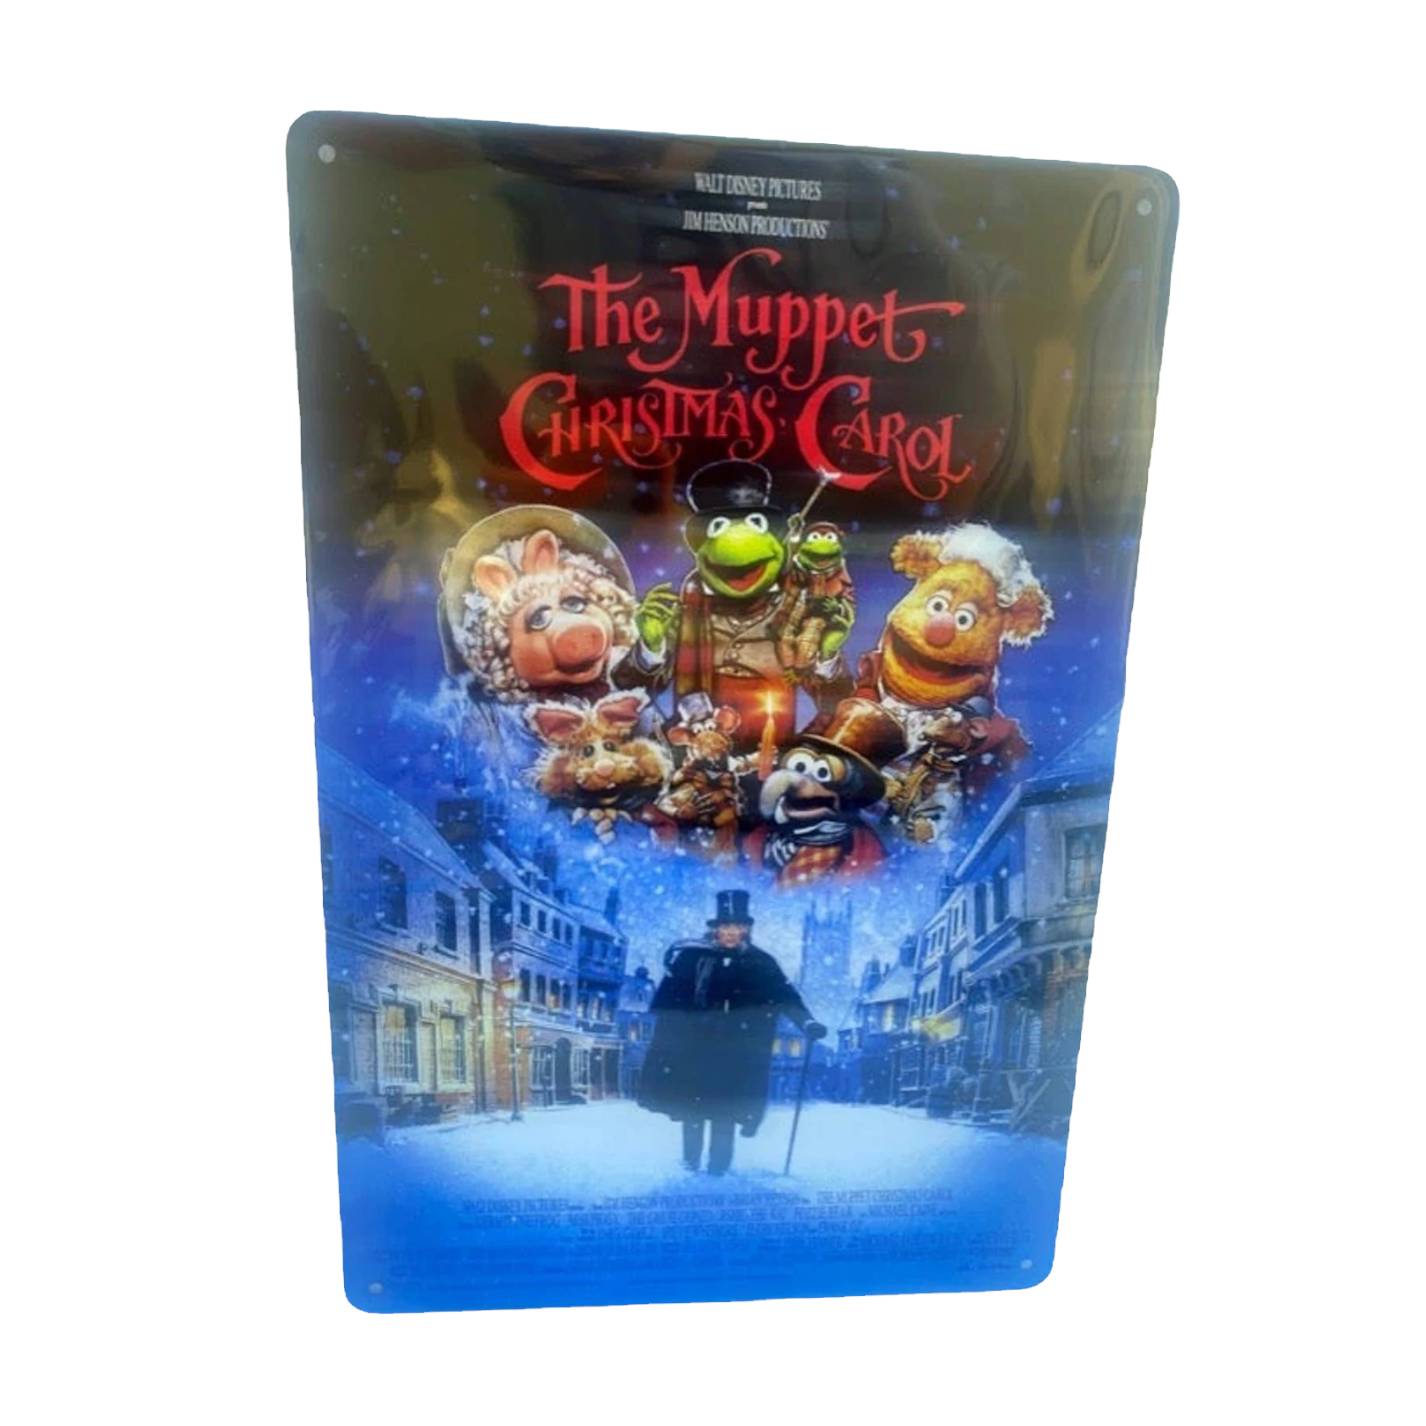 The Muppets Christmas Carol Movie Poster Tin Sign 8"x12"